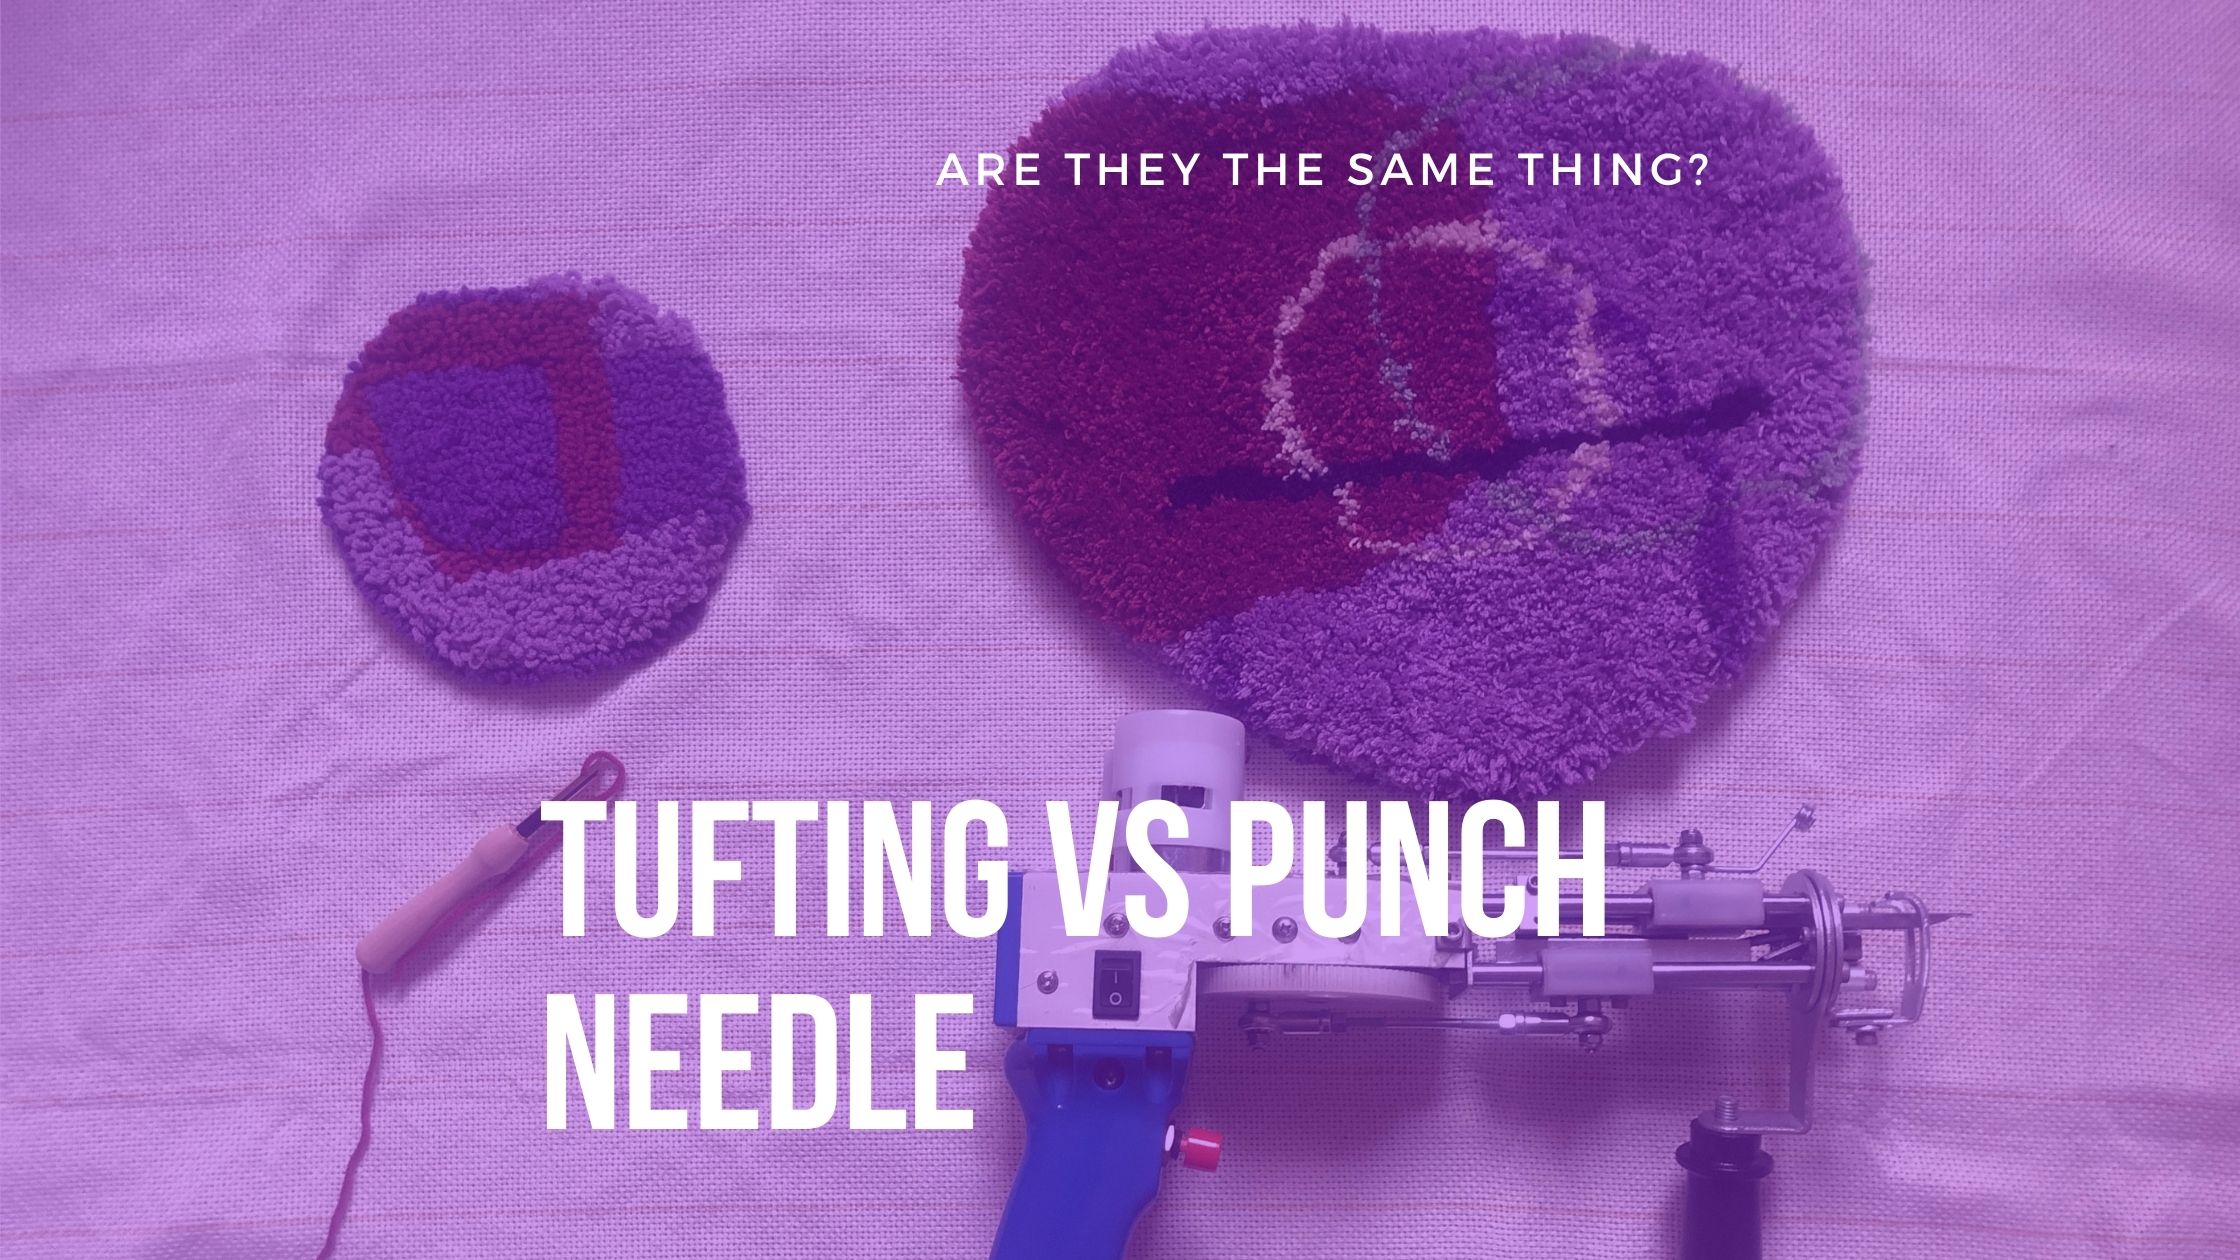 Tufting vs Punch Needle, Are They The Same Thing?